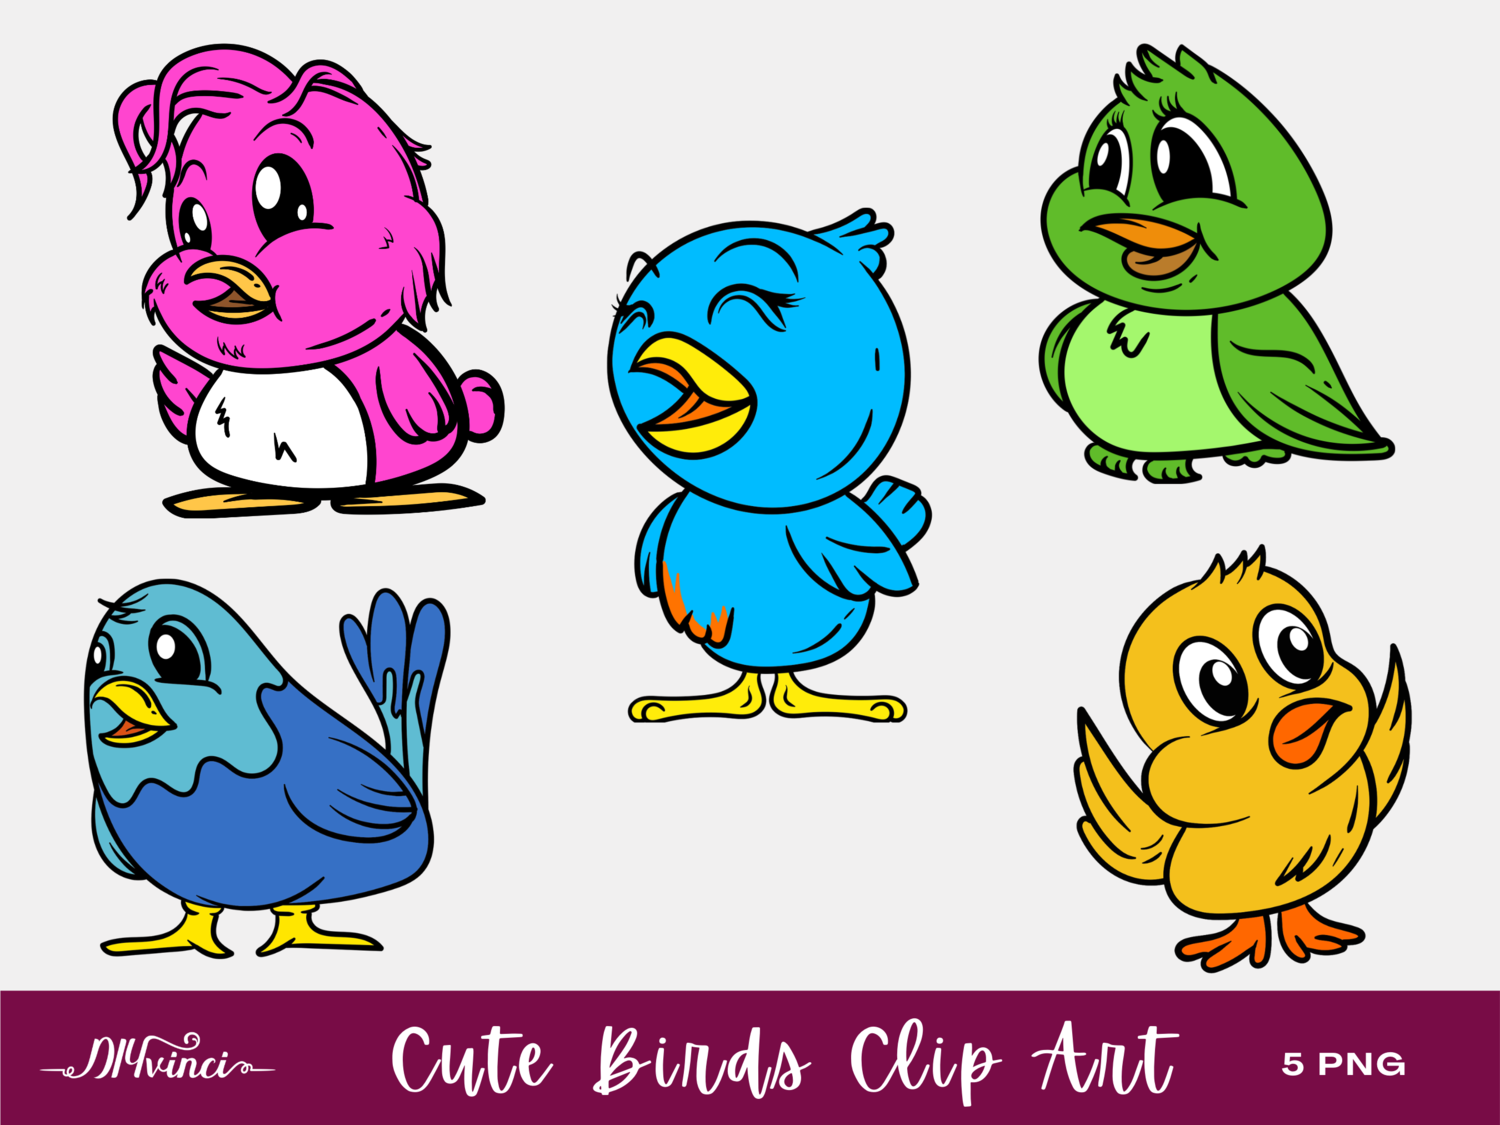 5 Cute Birds Clip Art - PNG - Personal & Commercial Use